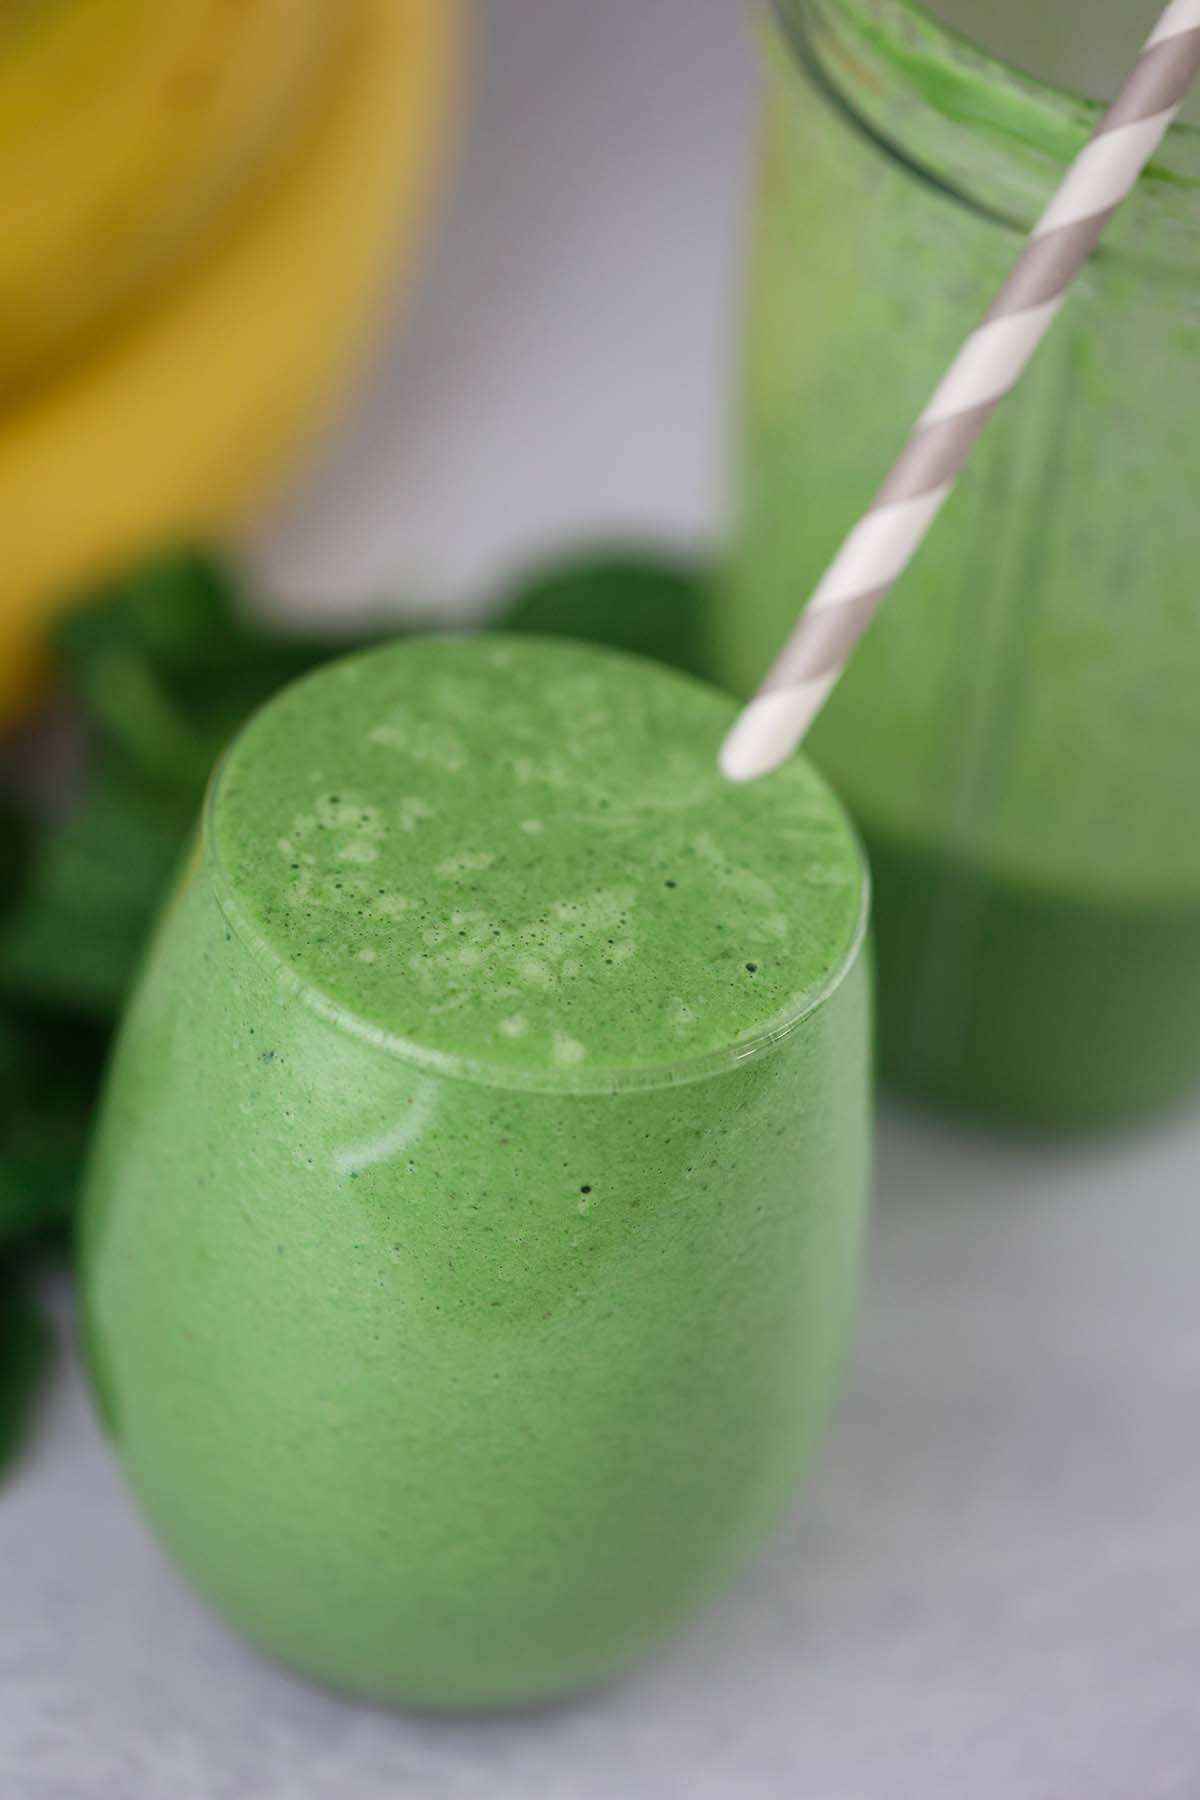 spinach banana smoothie with a straw.